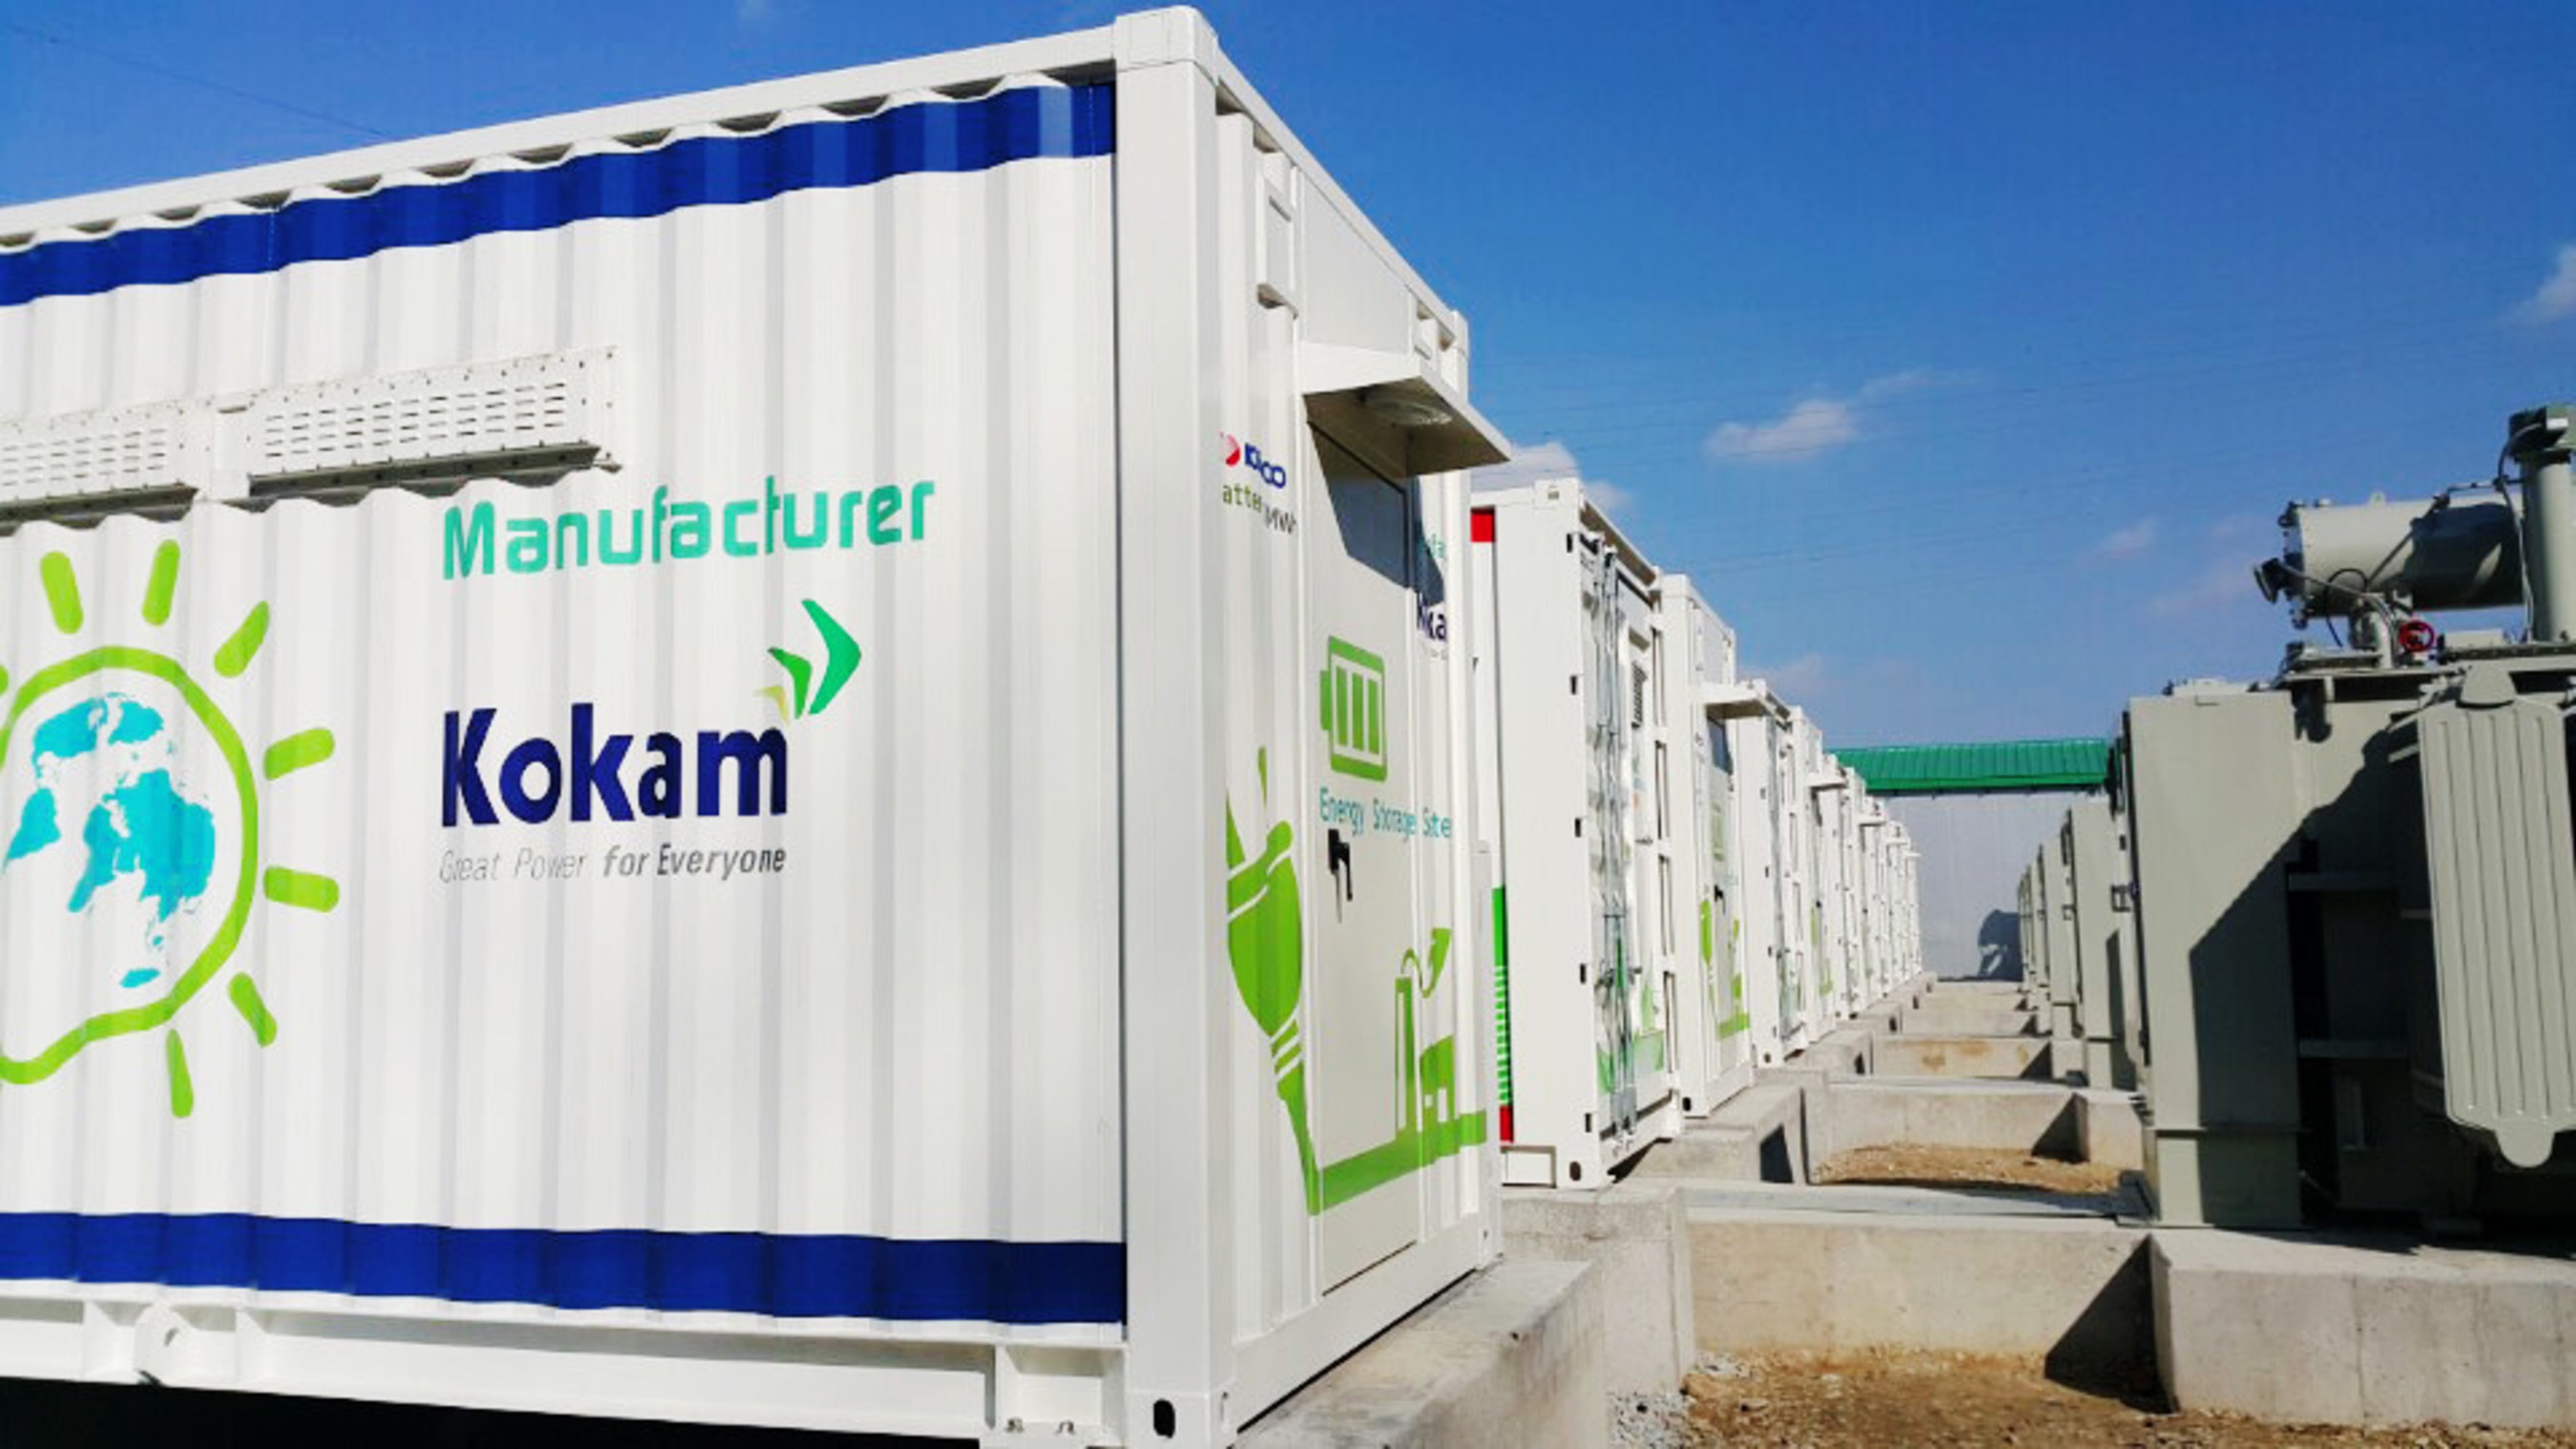 This Kokam 24-megawatt Energy Storage System (ESS), deployed for use by South Korea's largest utility, Korea Electric Power Corporation (KEPCO), is the world's largest Lithium NMC ESS for frequency regulation